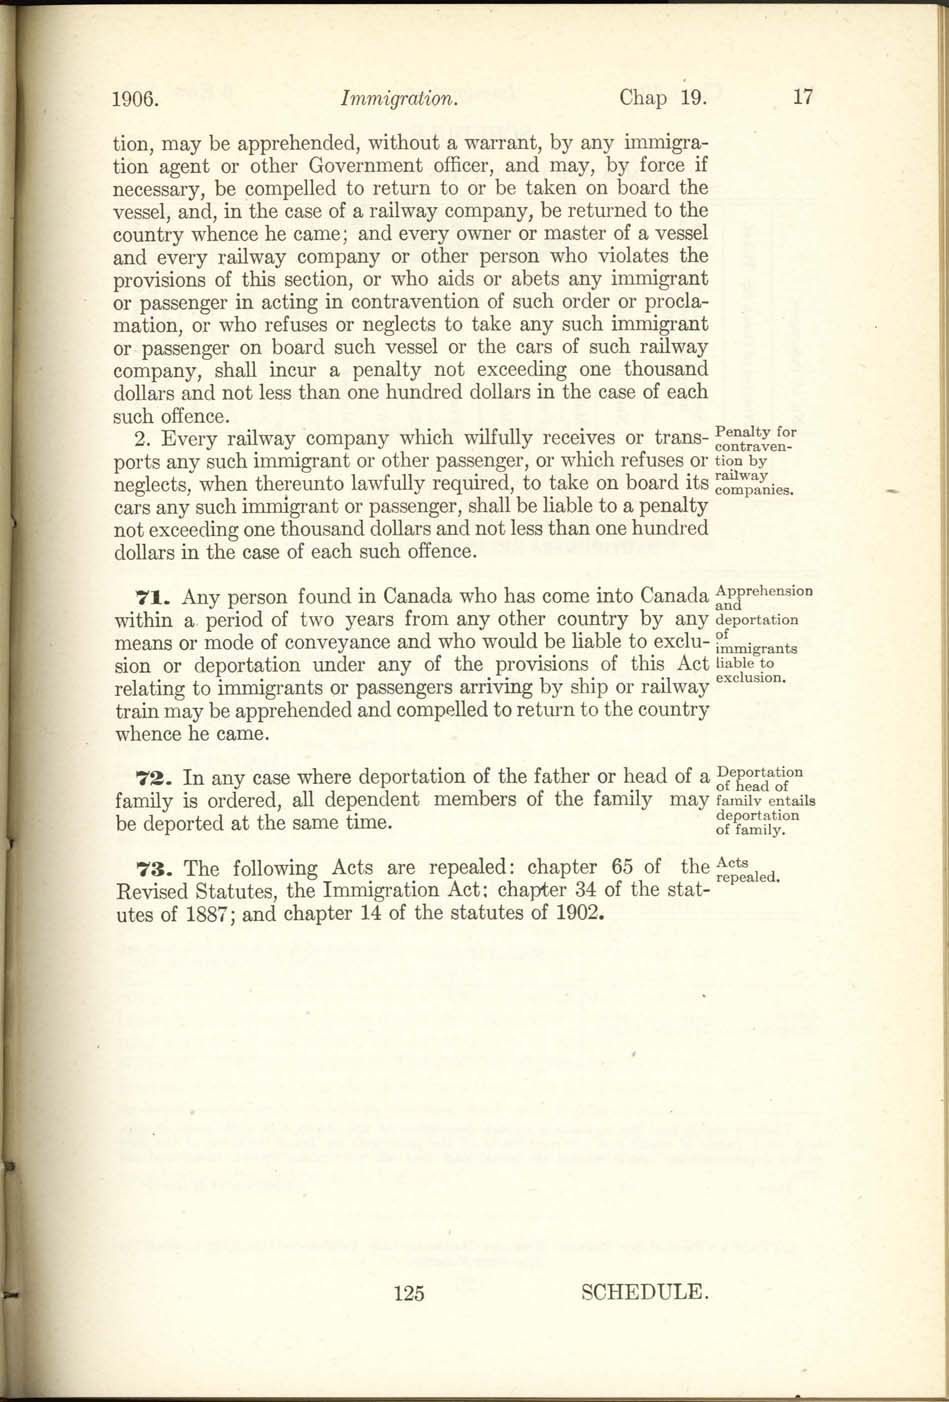 Chap. 19 Page 125 Immigration Act, 1906